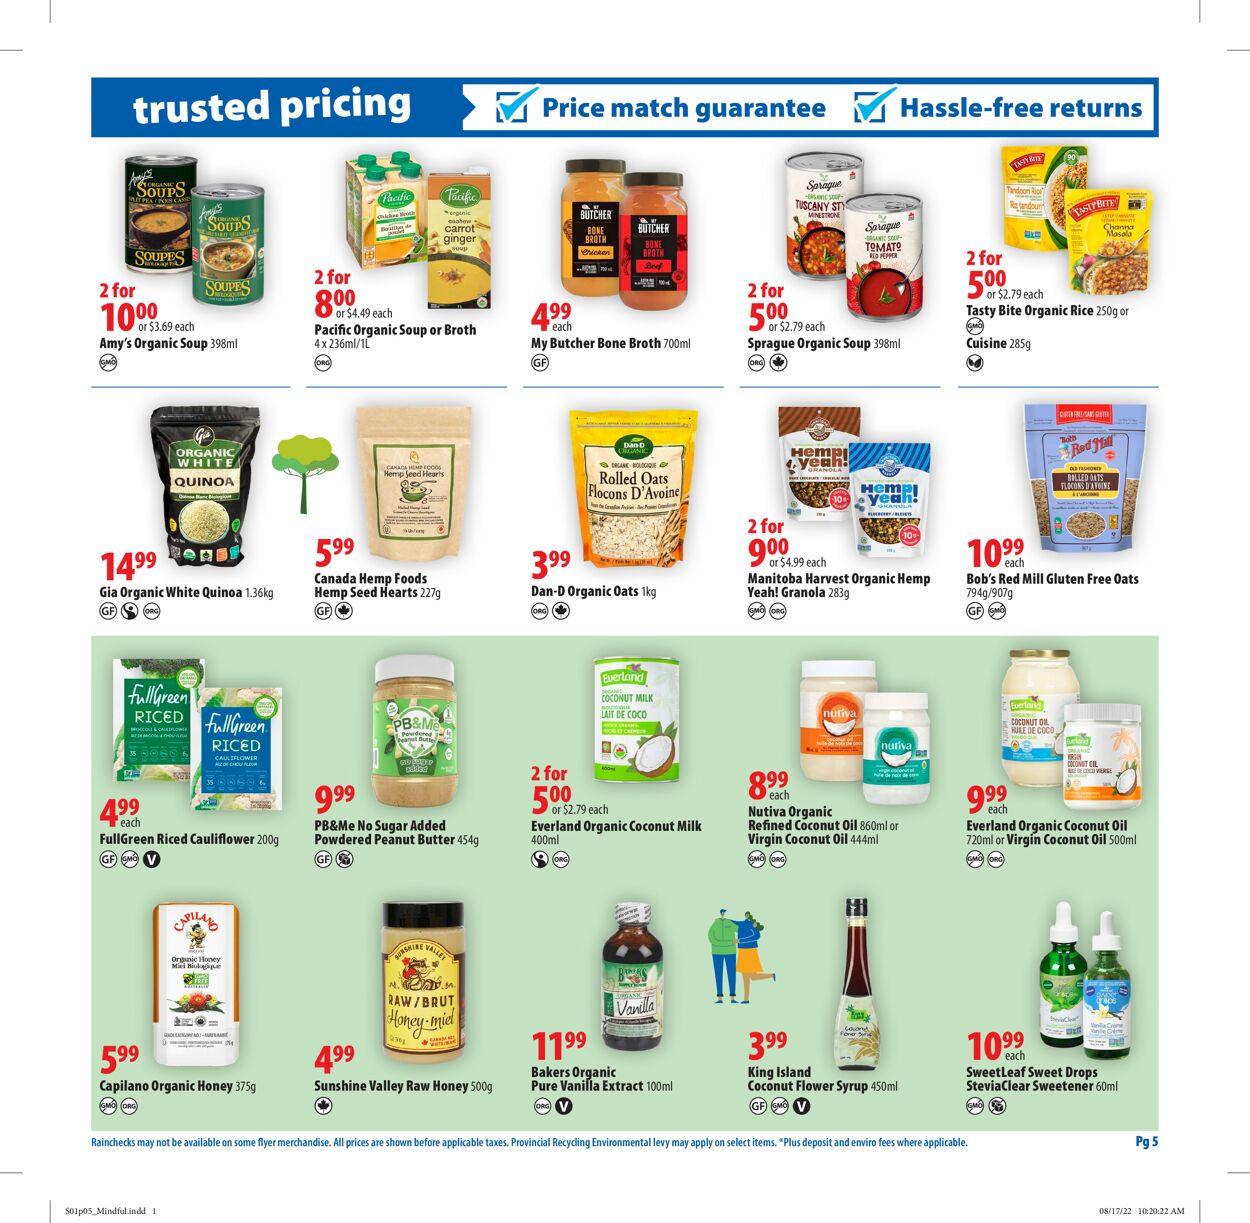 London Drugs Flyer from 09/01/2022